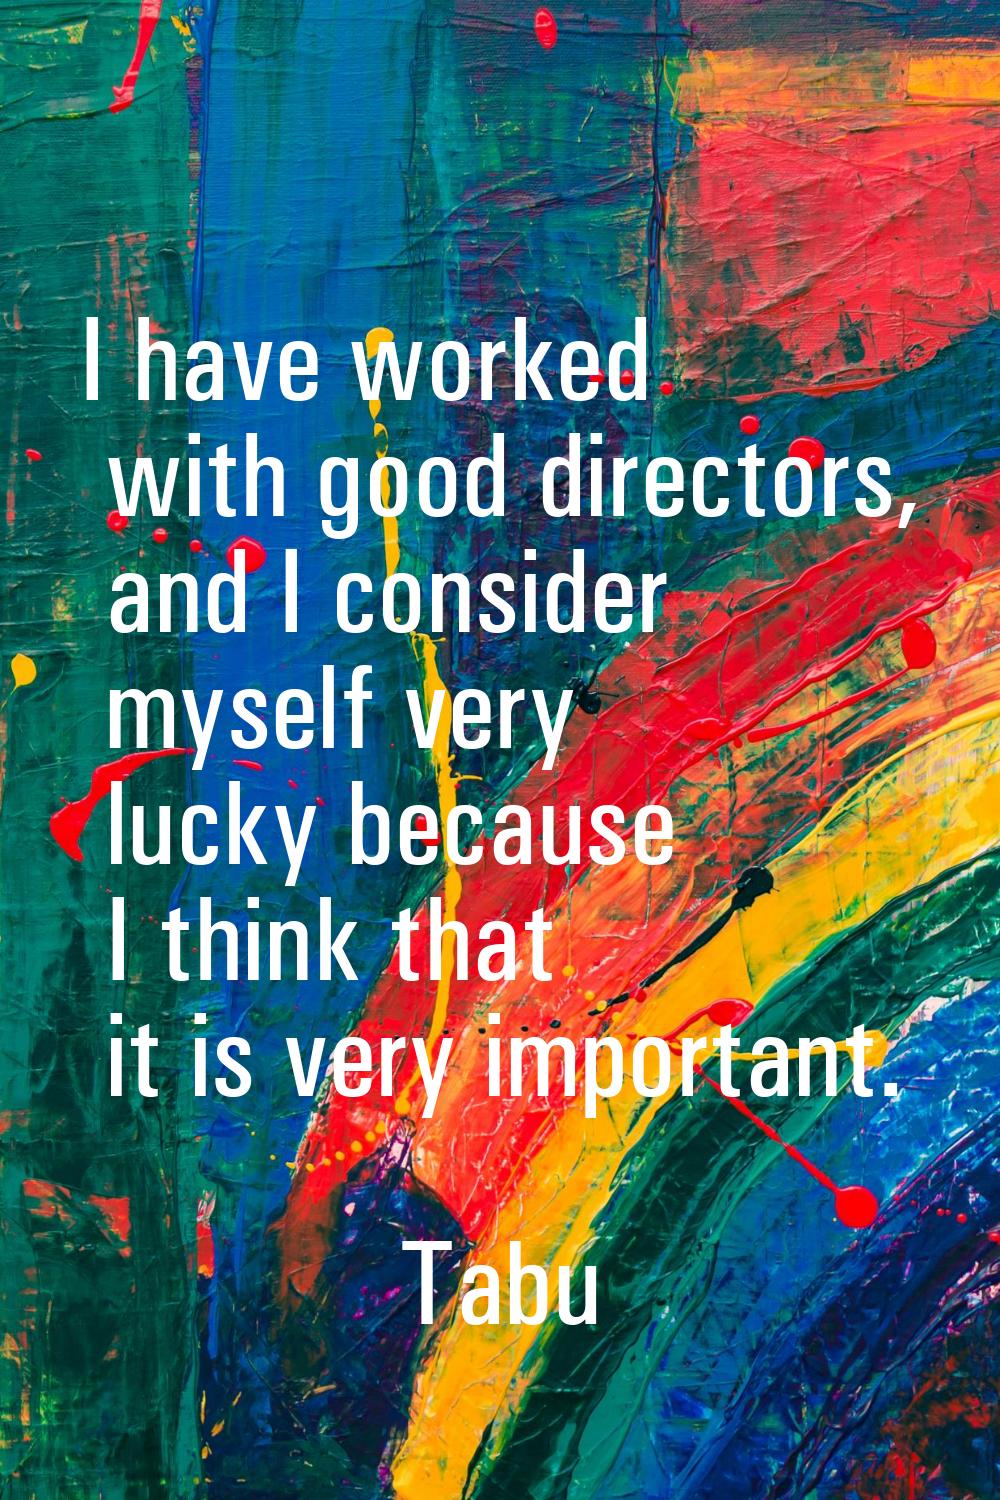 I have worked with good directors, and I consider myself very lucky because I think that it is very